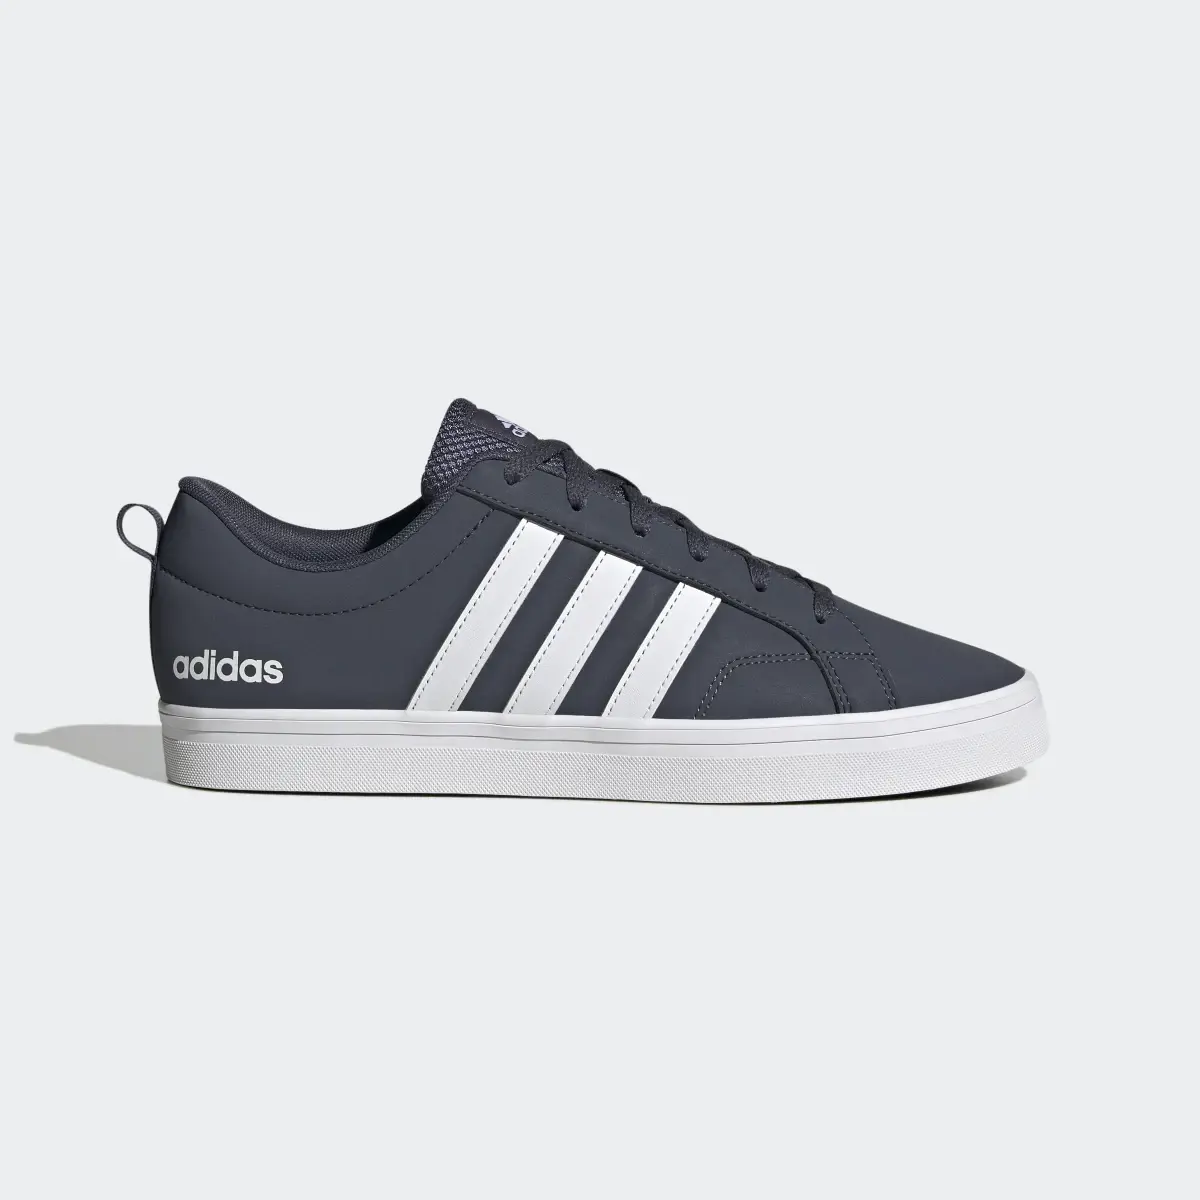 Adidas VS Pace 2.0 Shoes. 2